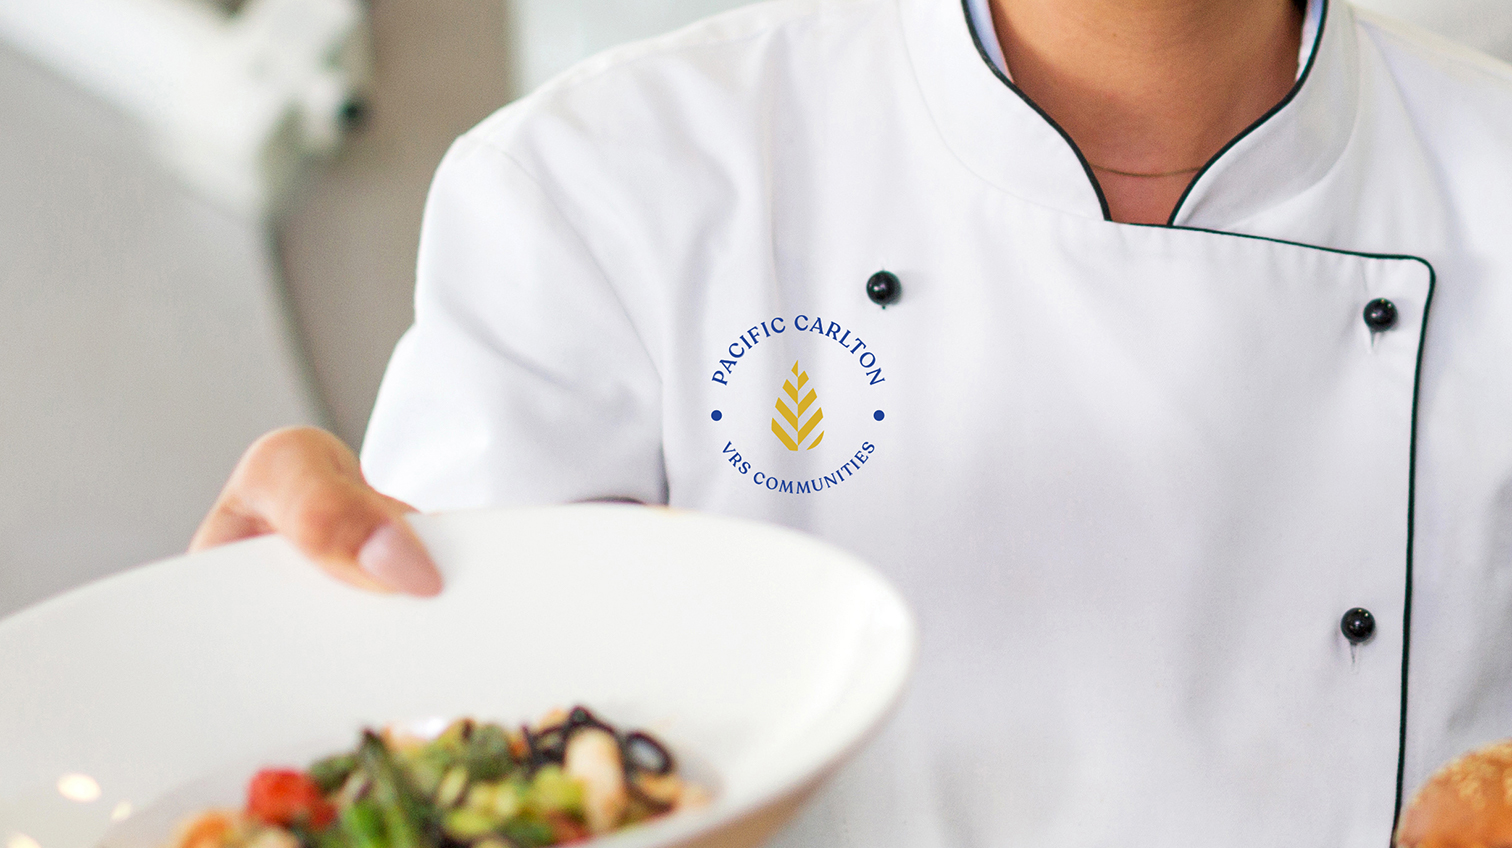 VRS Pacific Carlton logo on a Chef's uniform as she's holding a plate of food - White Canvas Design